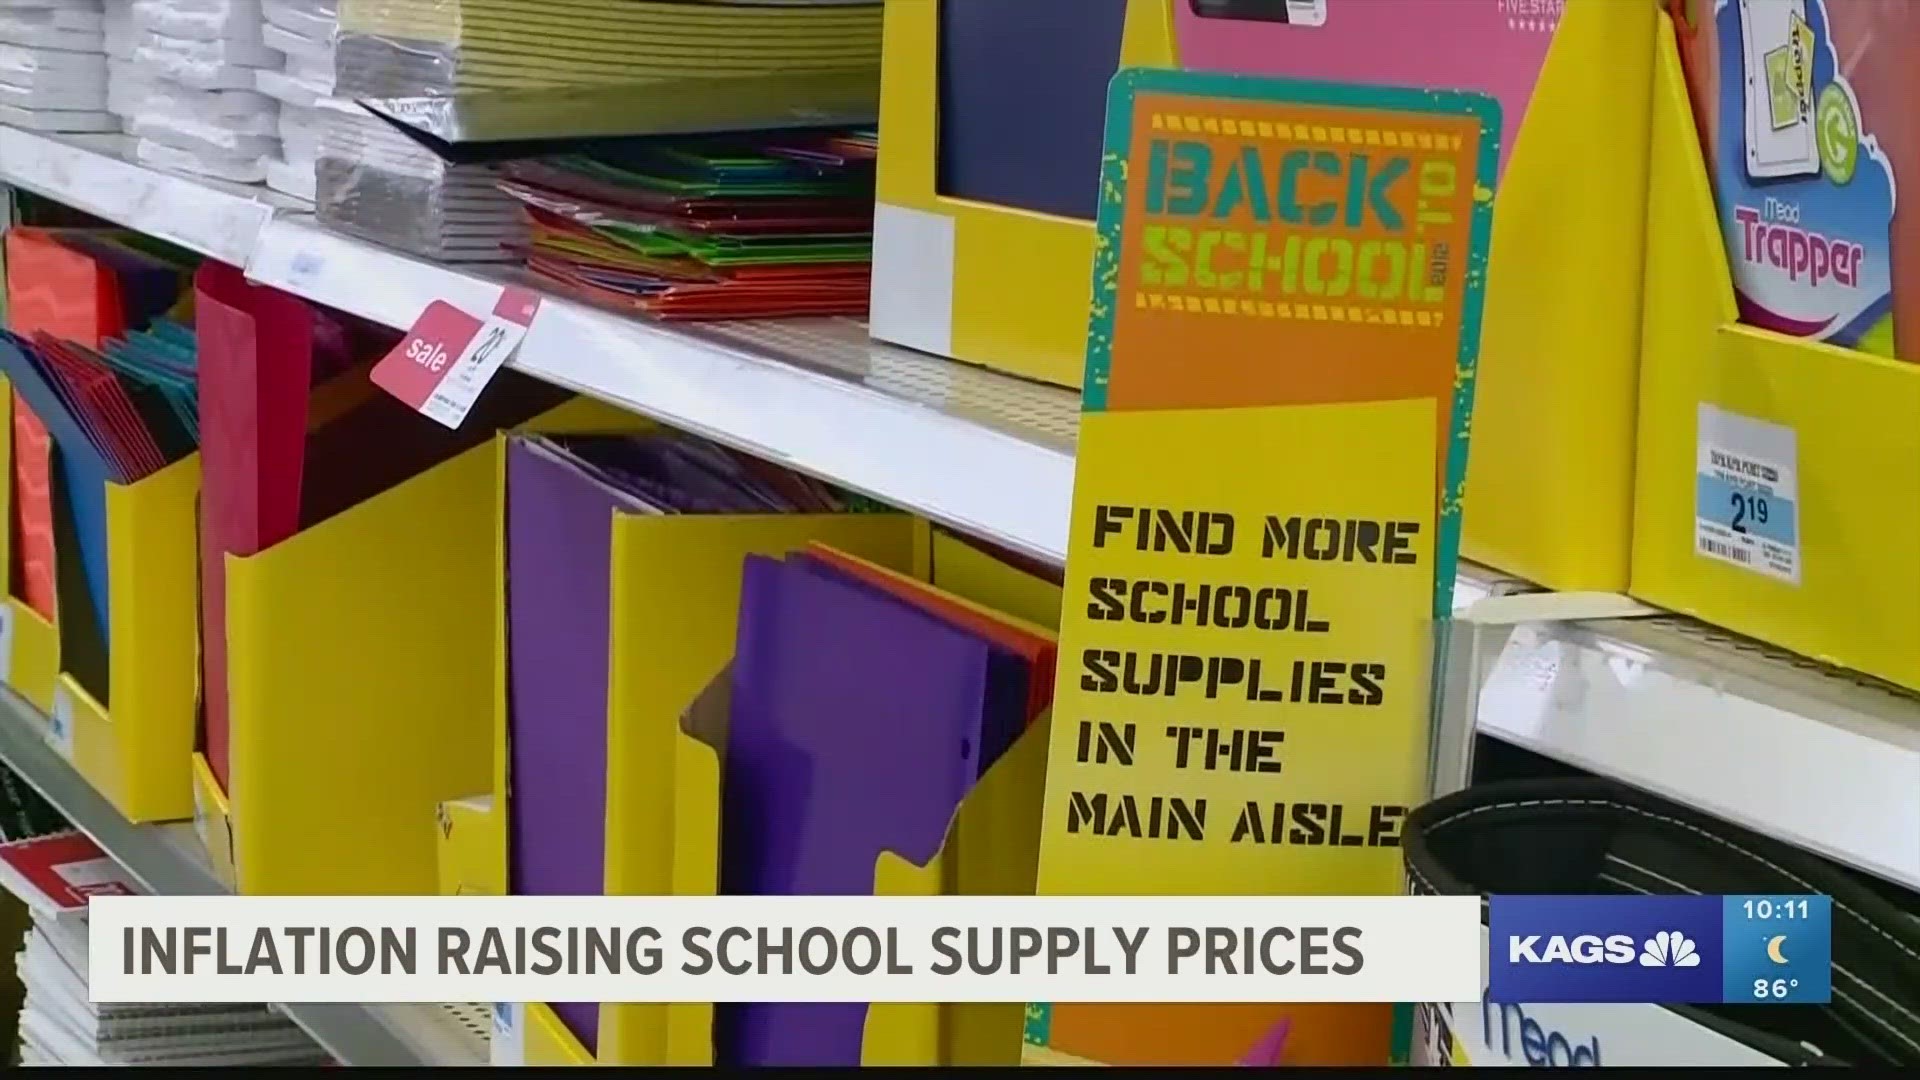 Dallin Hatch, a consumer expert, sat down with KAGS's Sara Wilson to discuss how inflation is affecting school supply prices ahead of the start of the school year.